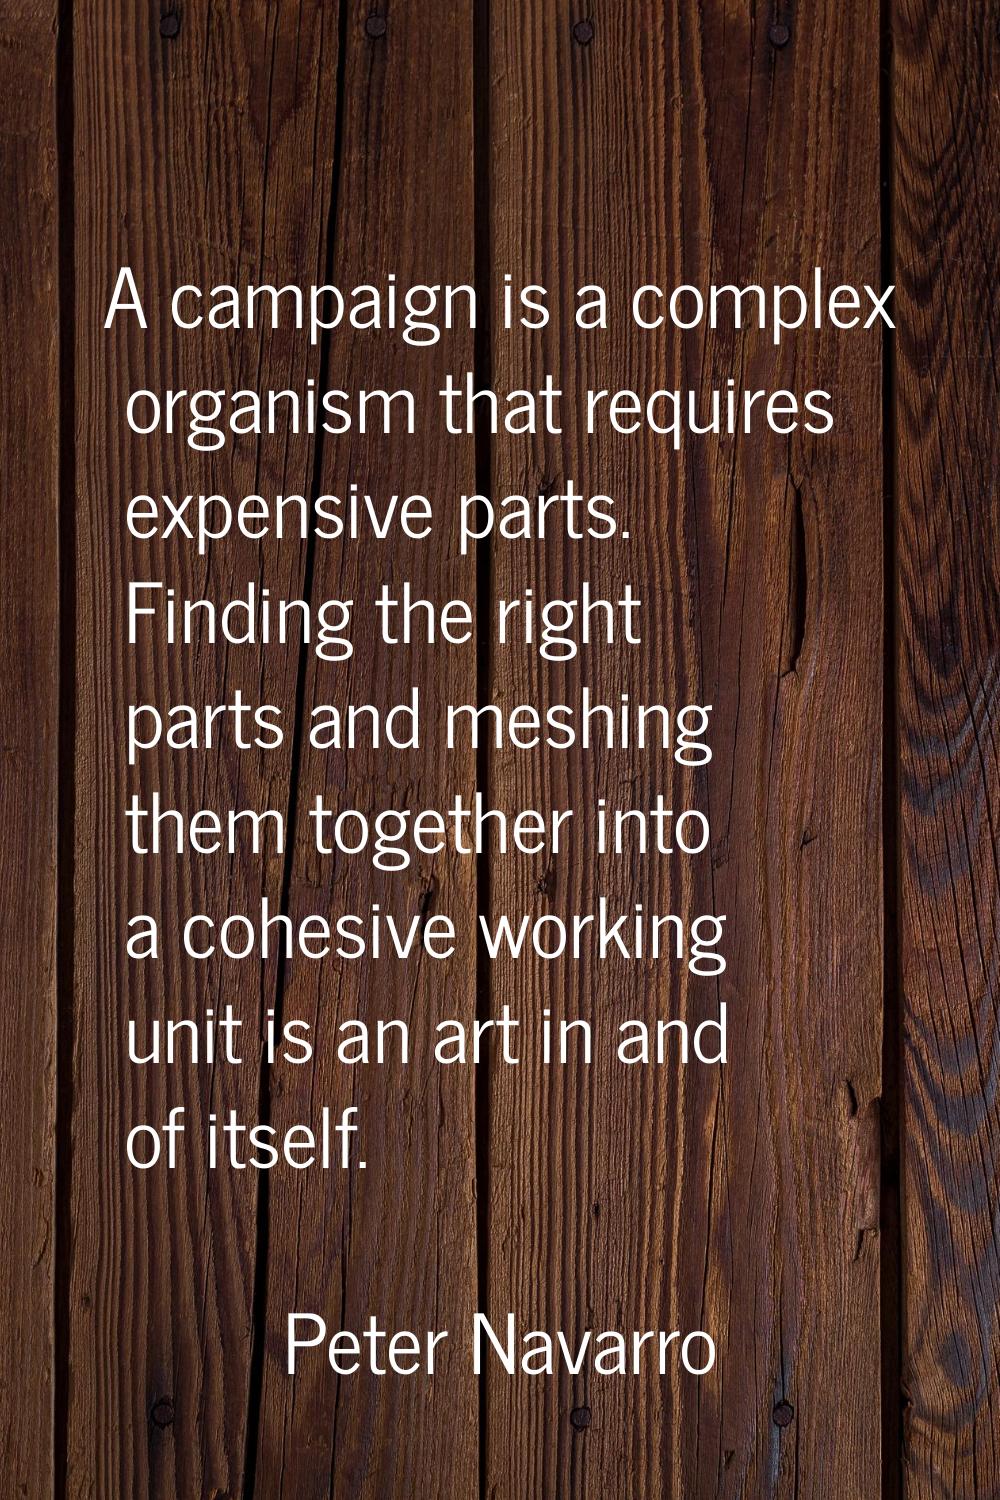 A campaign is a complex organism that requires expensive parts. Finding the right parts and meshing